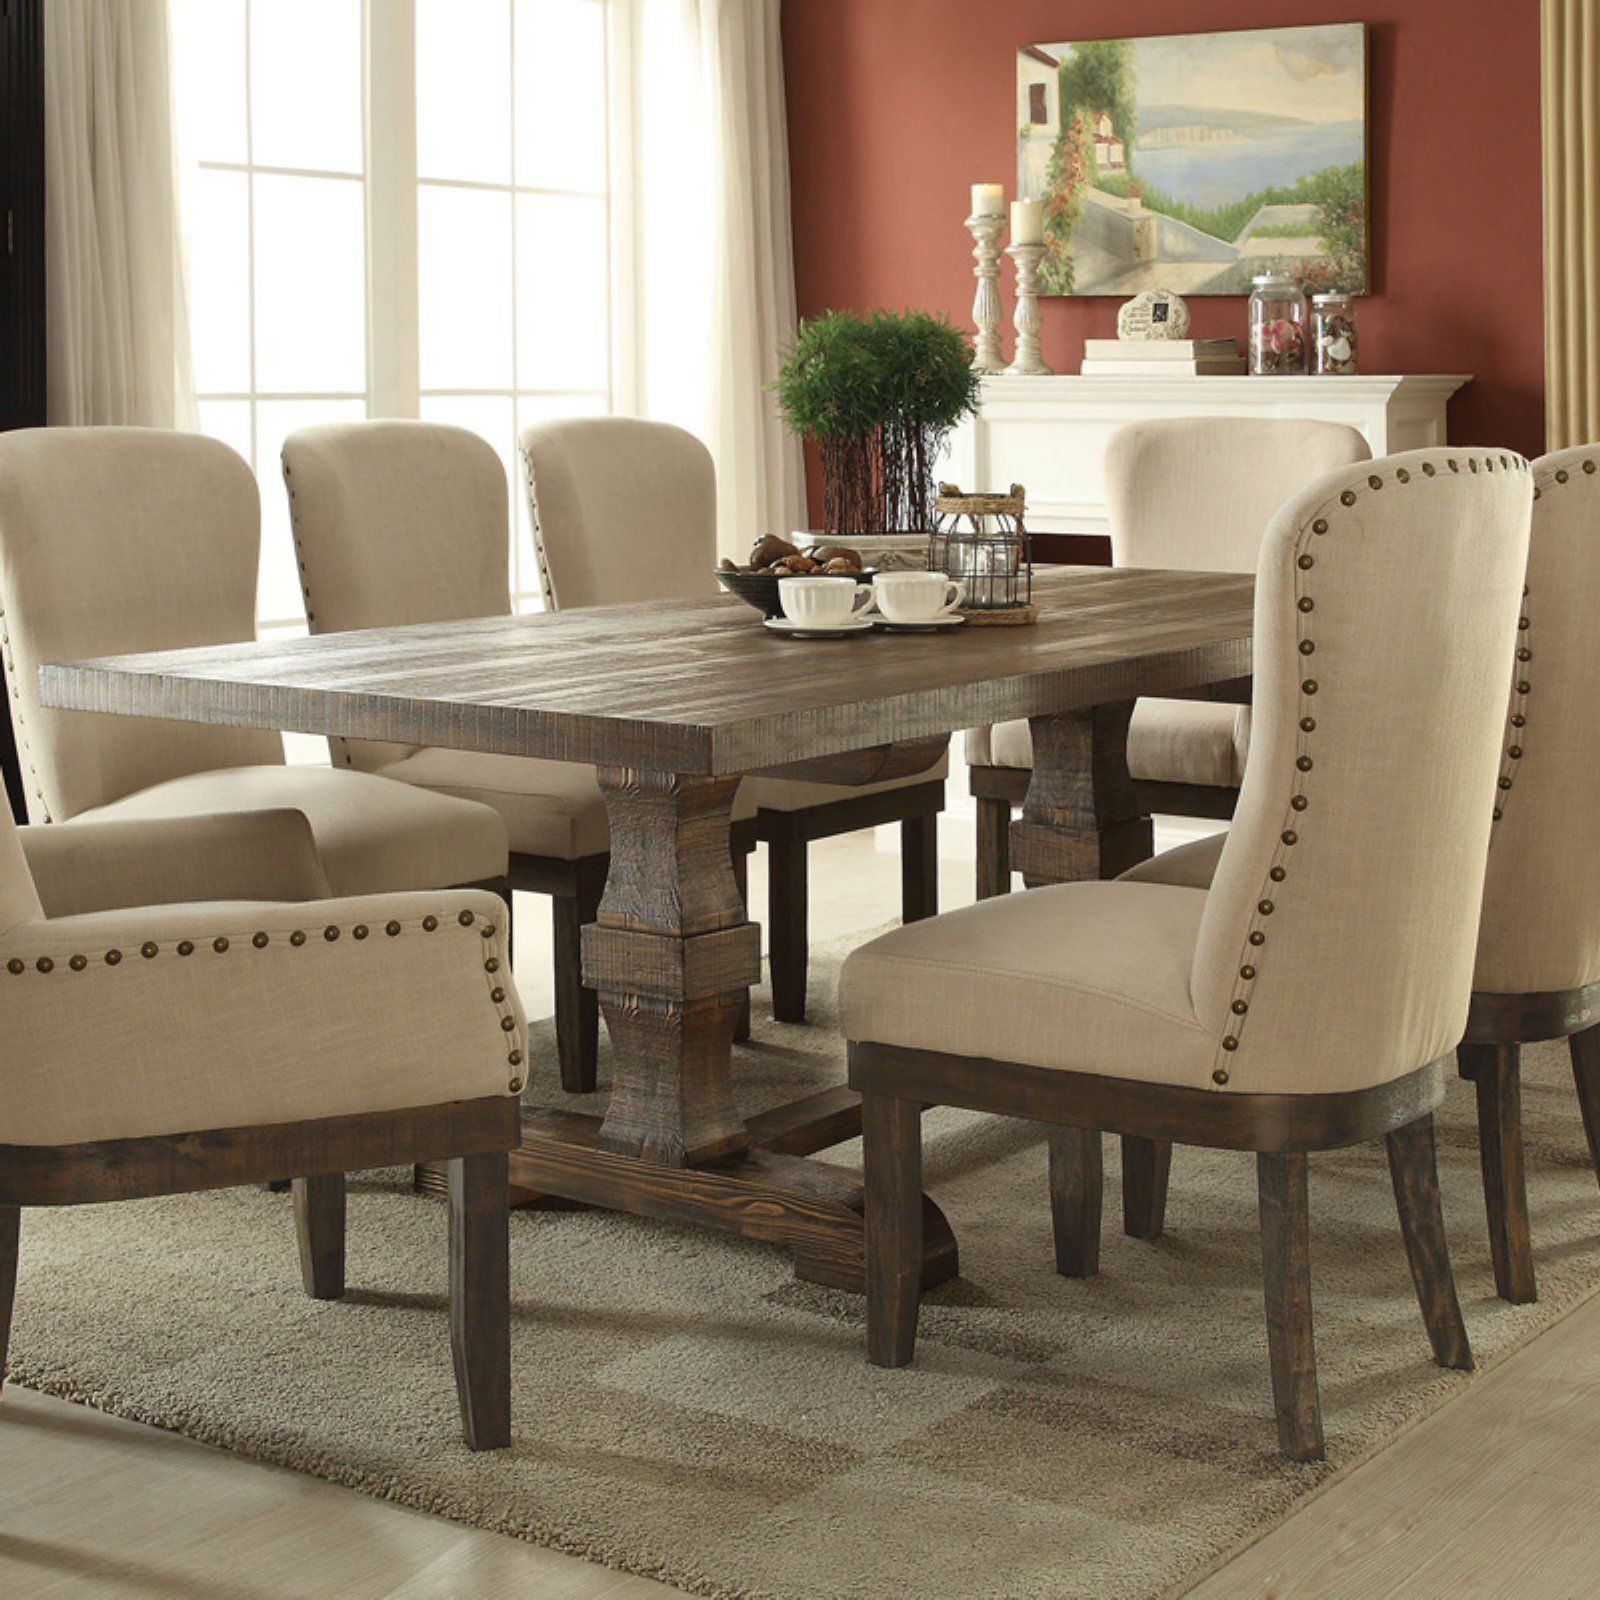 Natural Rectangle Dining Tables For Well Known Acme Furniture Landon Rectangular Dining Table – Walmart (View 5 of 15)